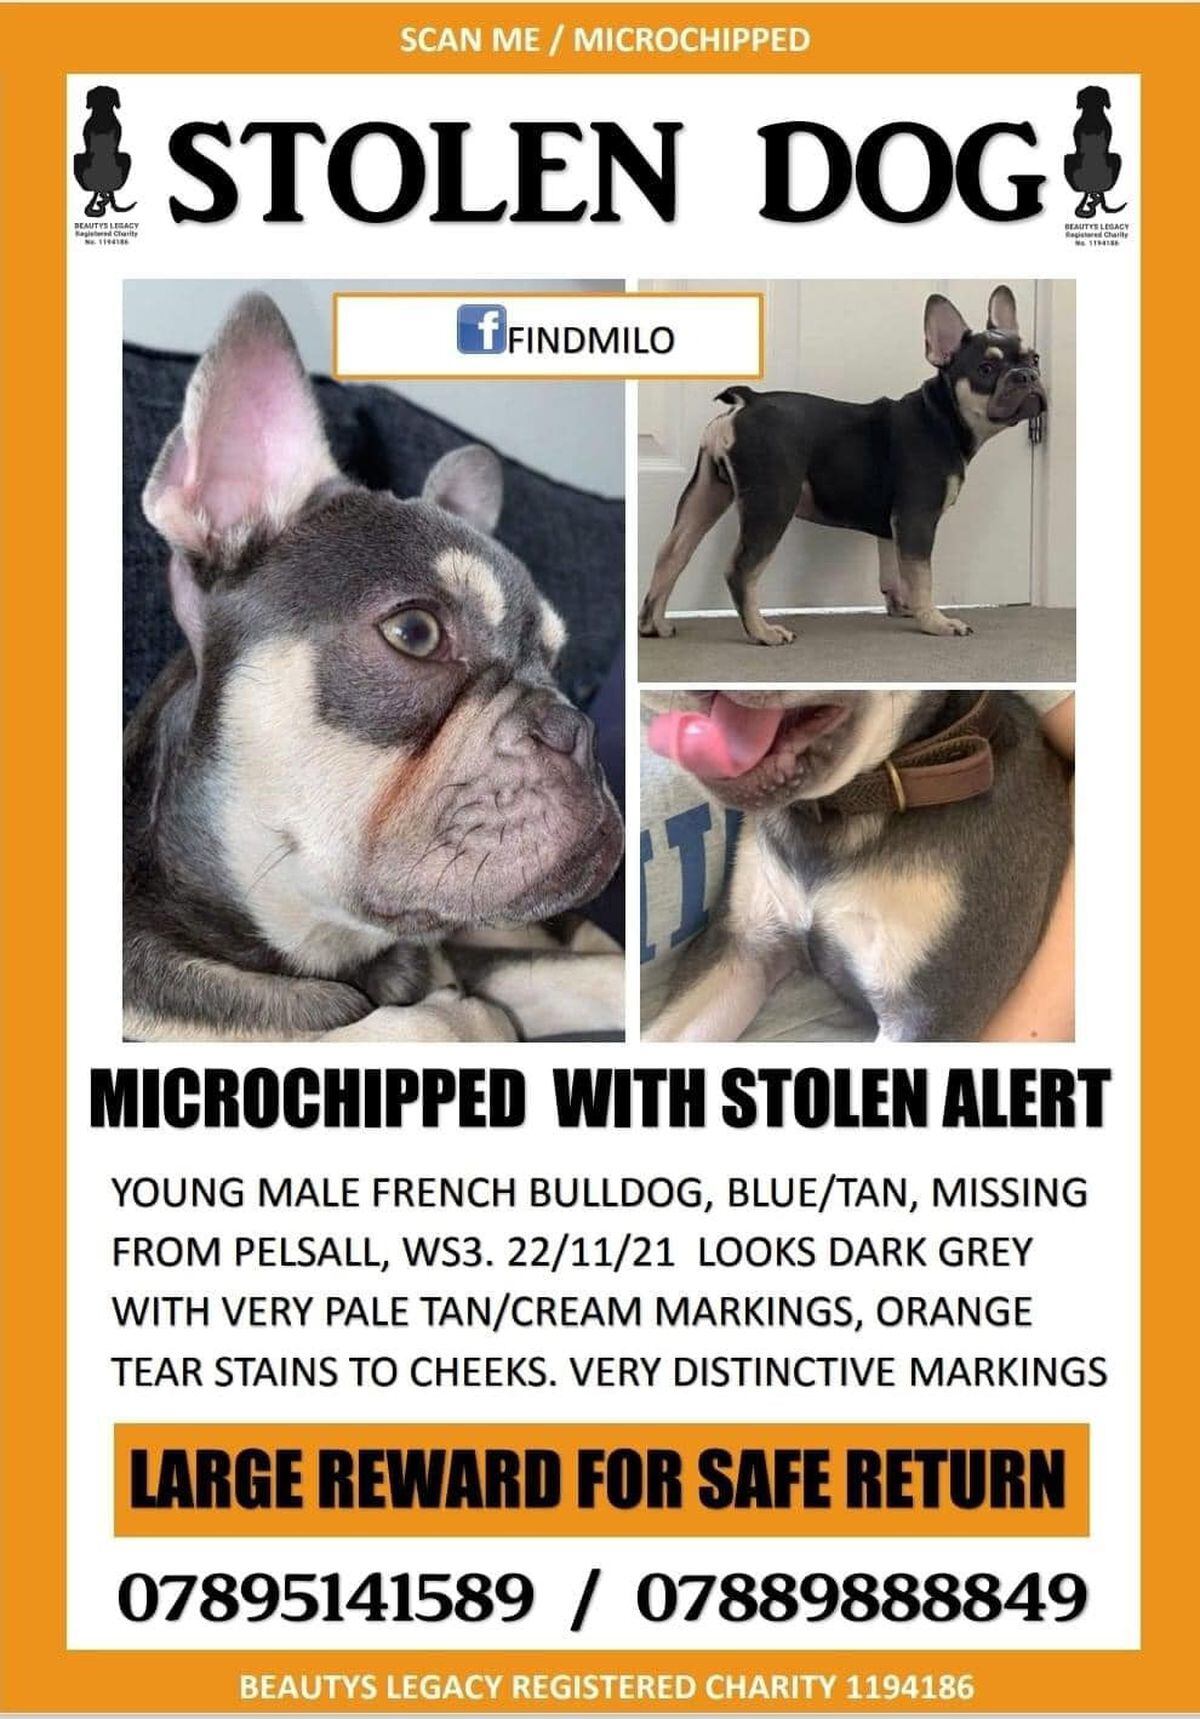 Milo has been missing since November 22